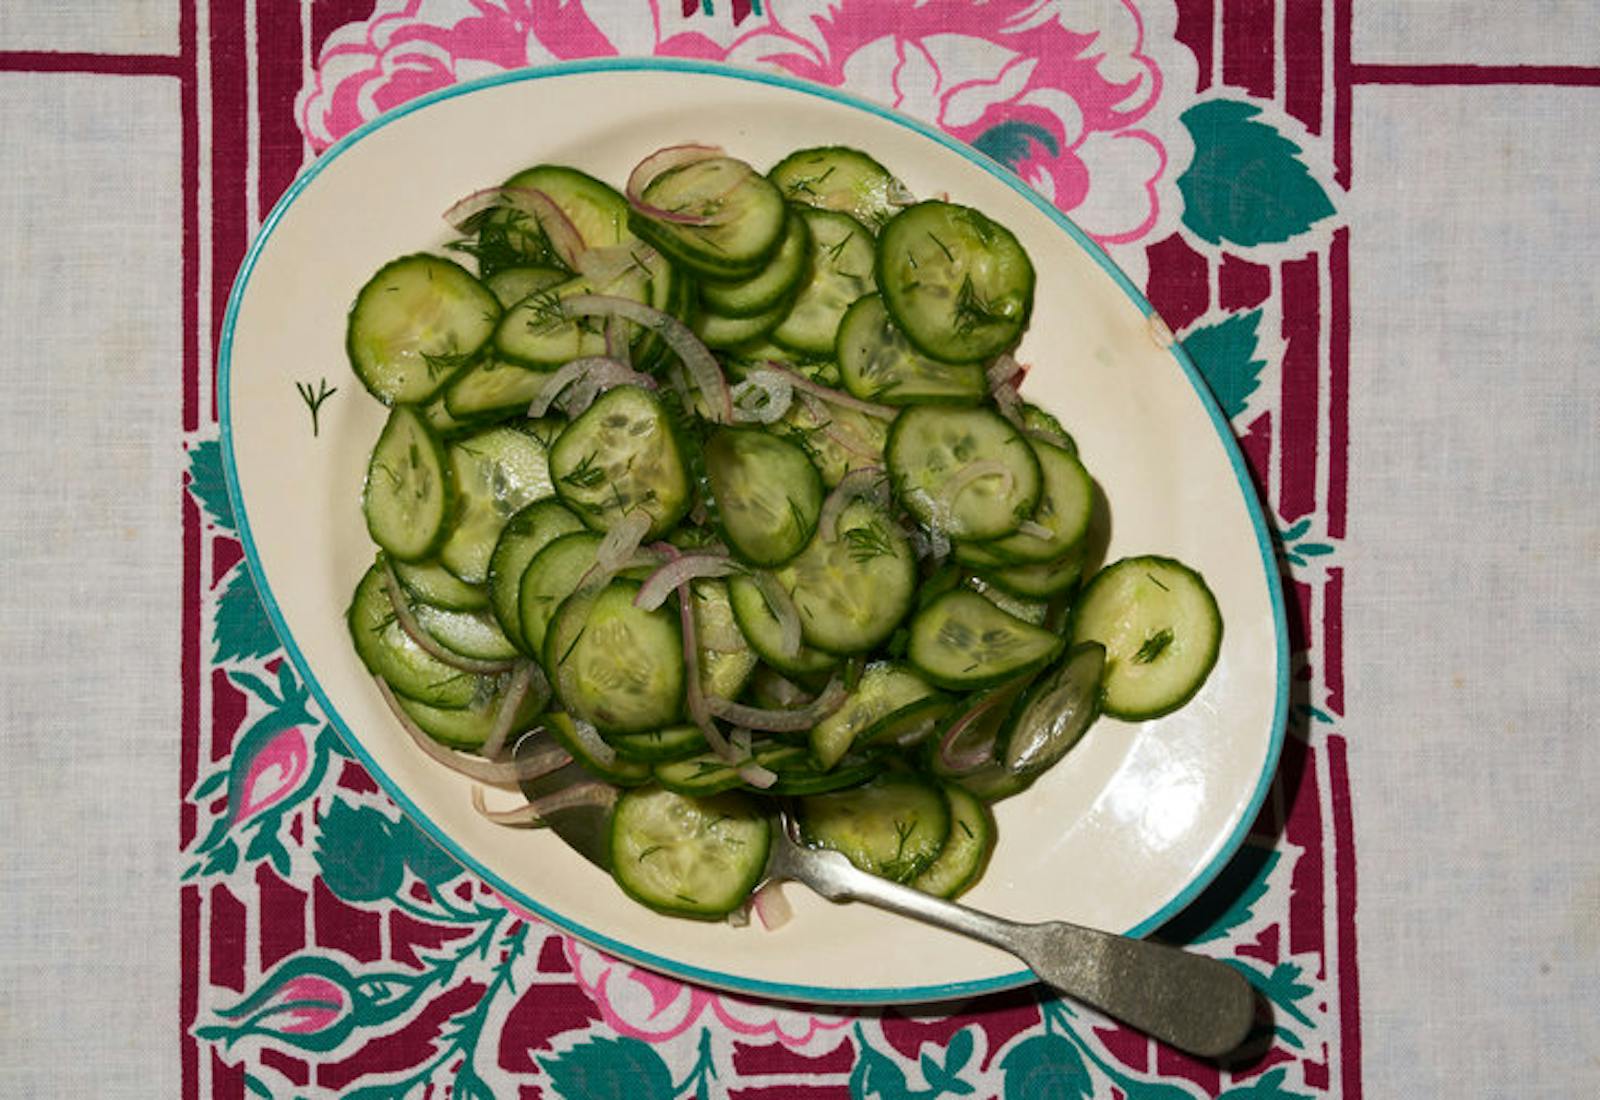 Pickled cucumber salad on green rimmed plate atop colorful tablecloth.